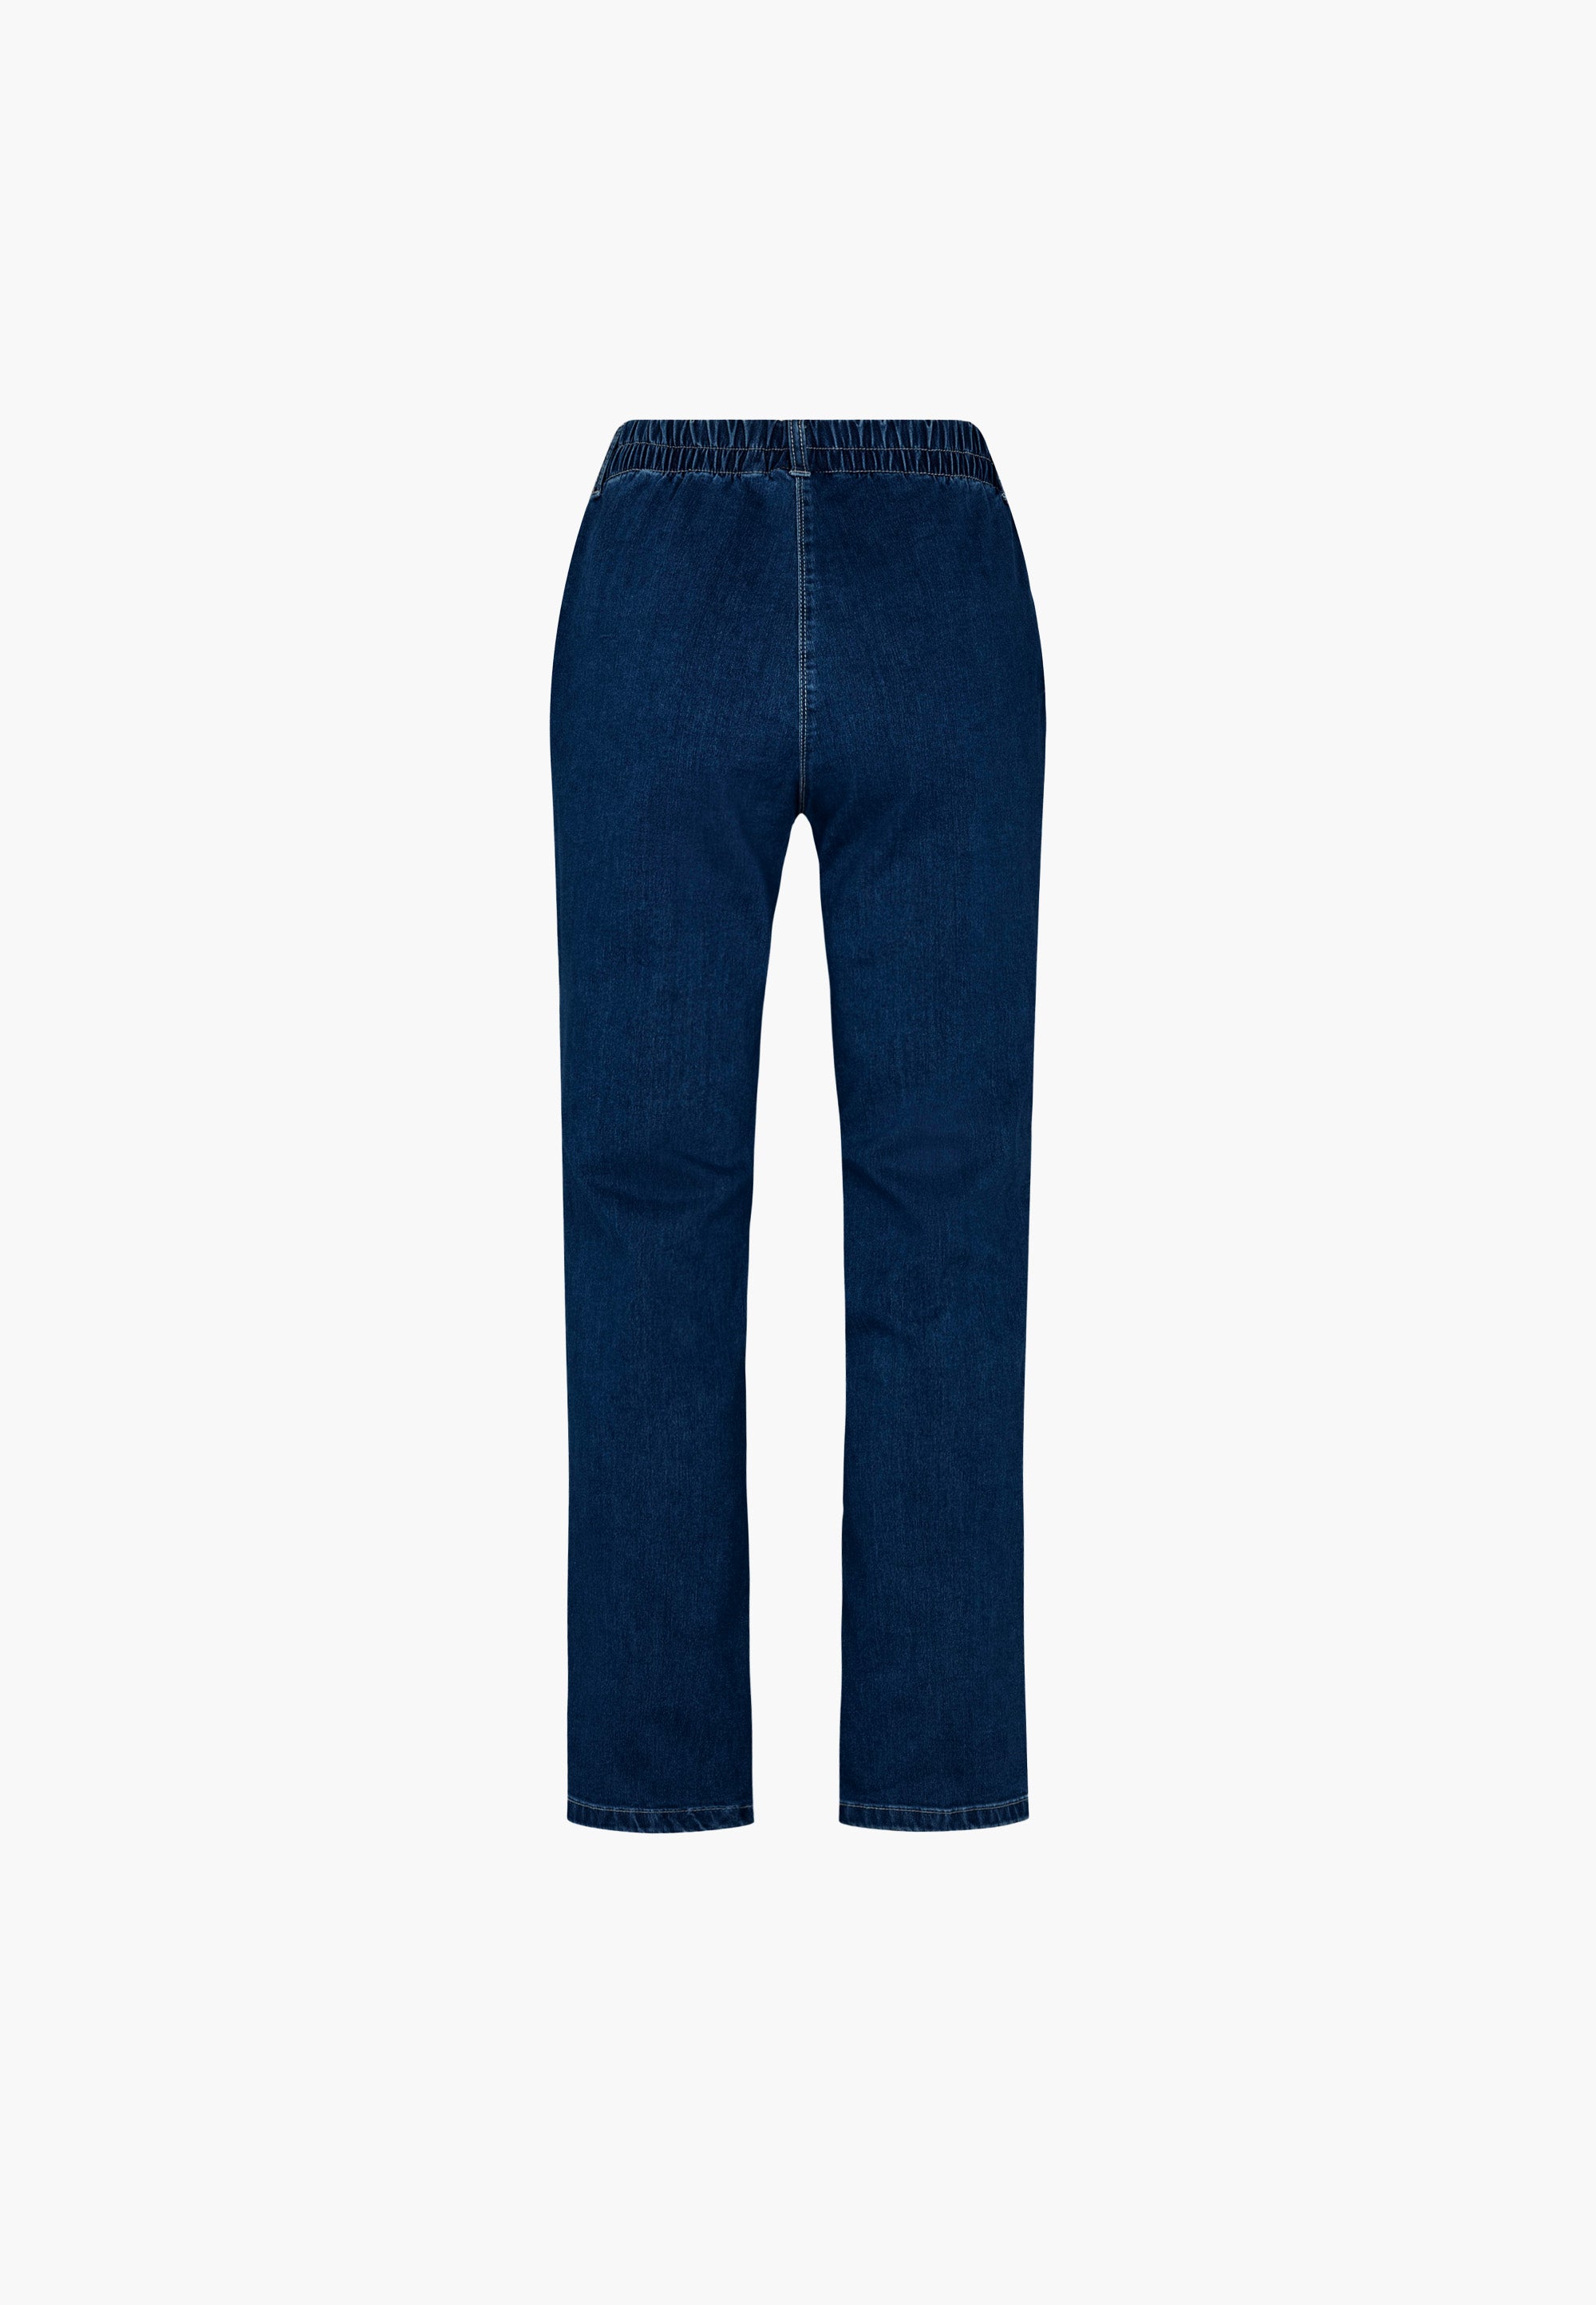 LAURIE  Violet Relaxed - Medium Length Trousers RELAXED 49501 Dark Blue Denim